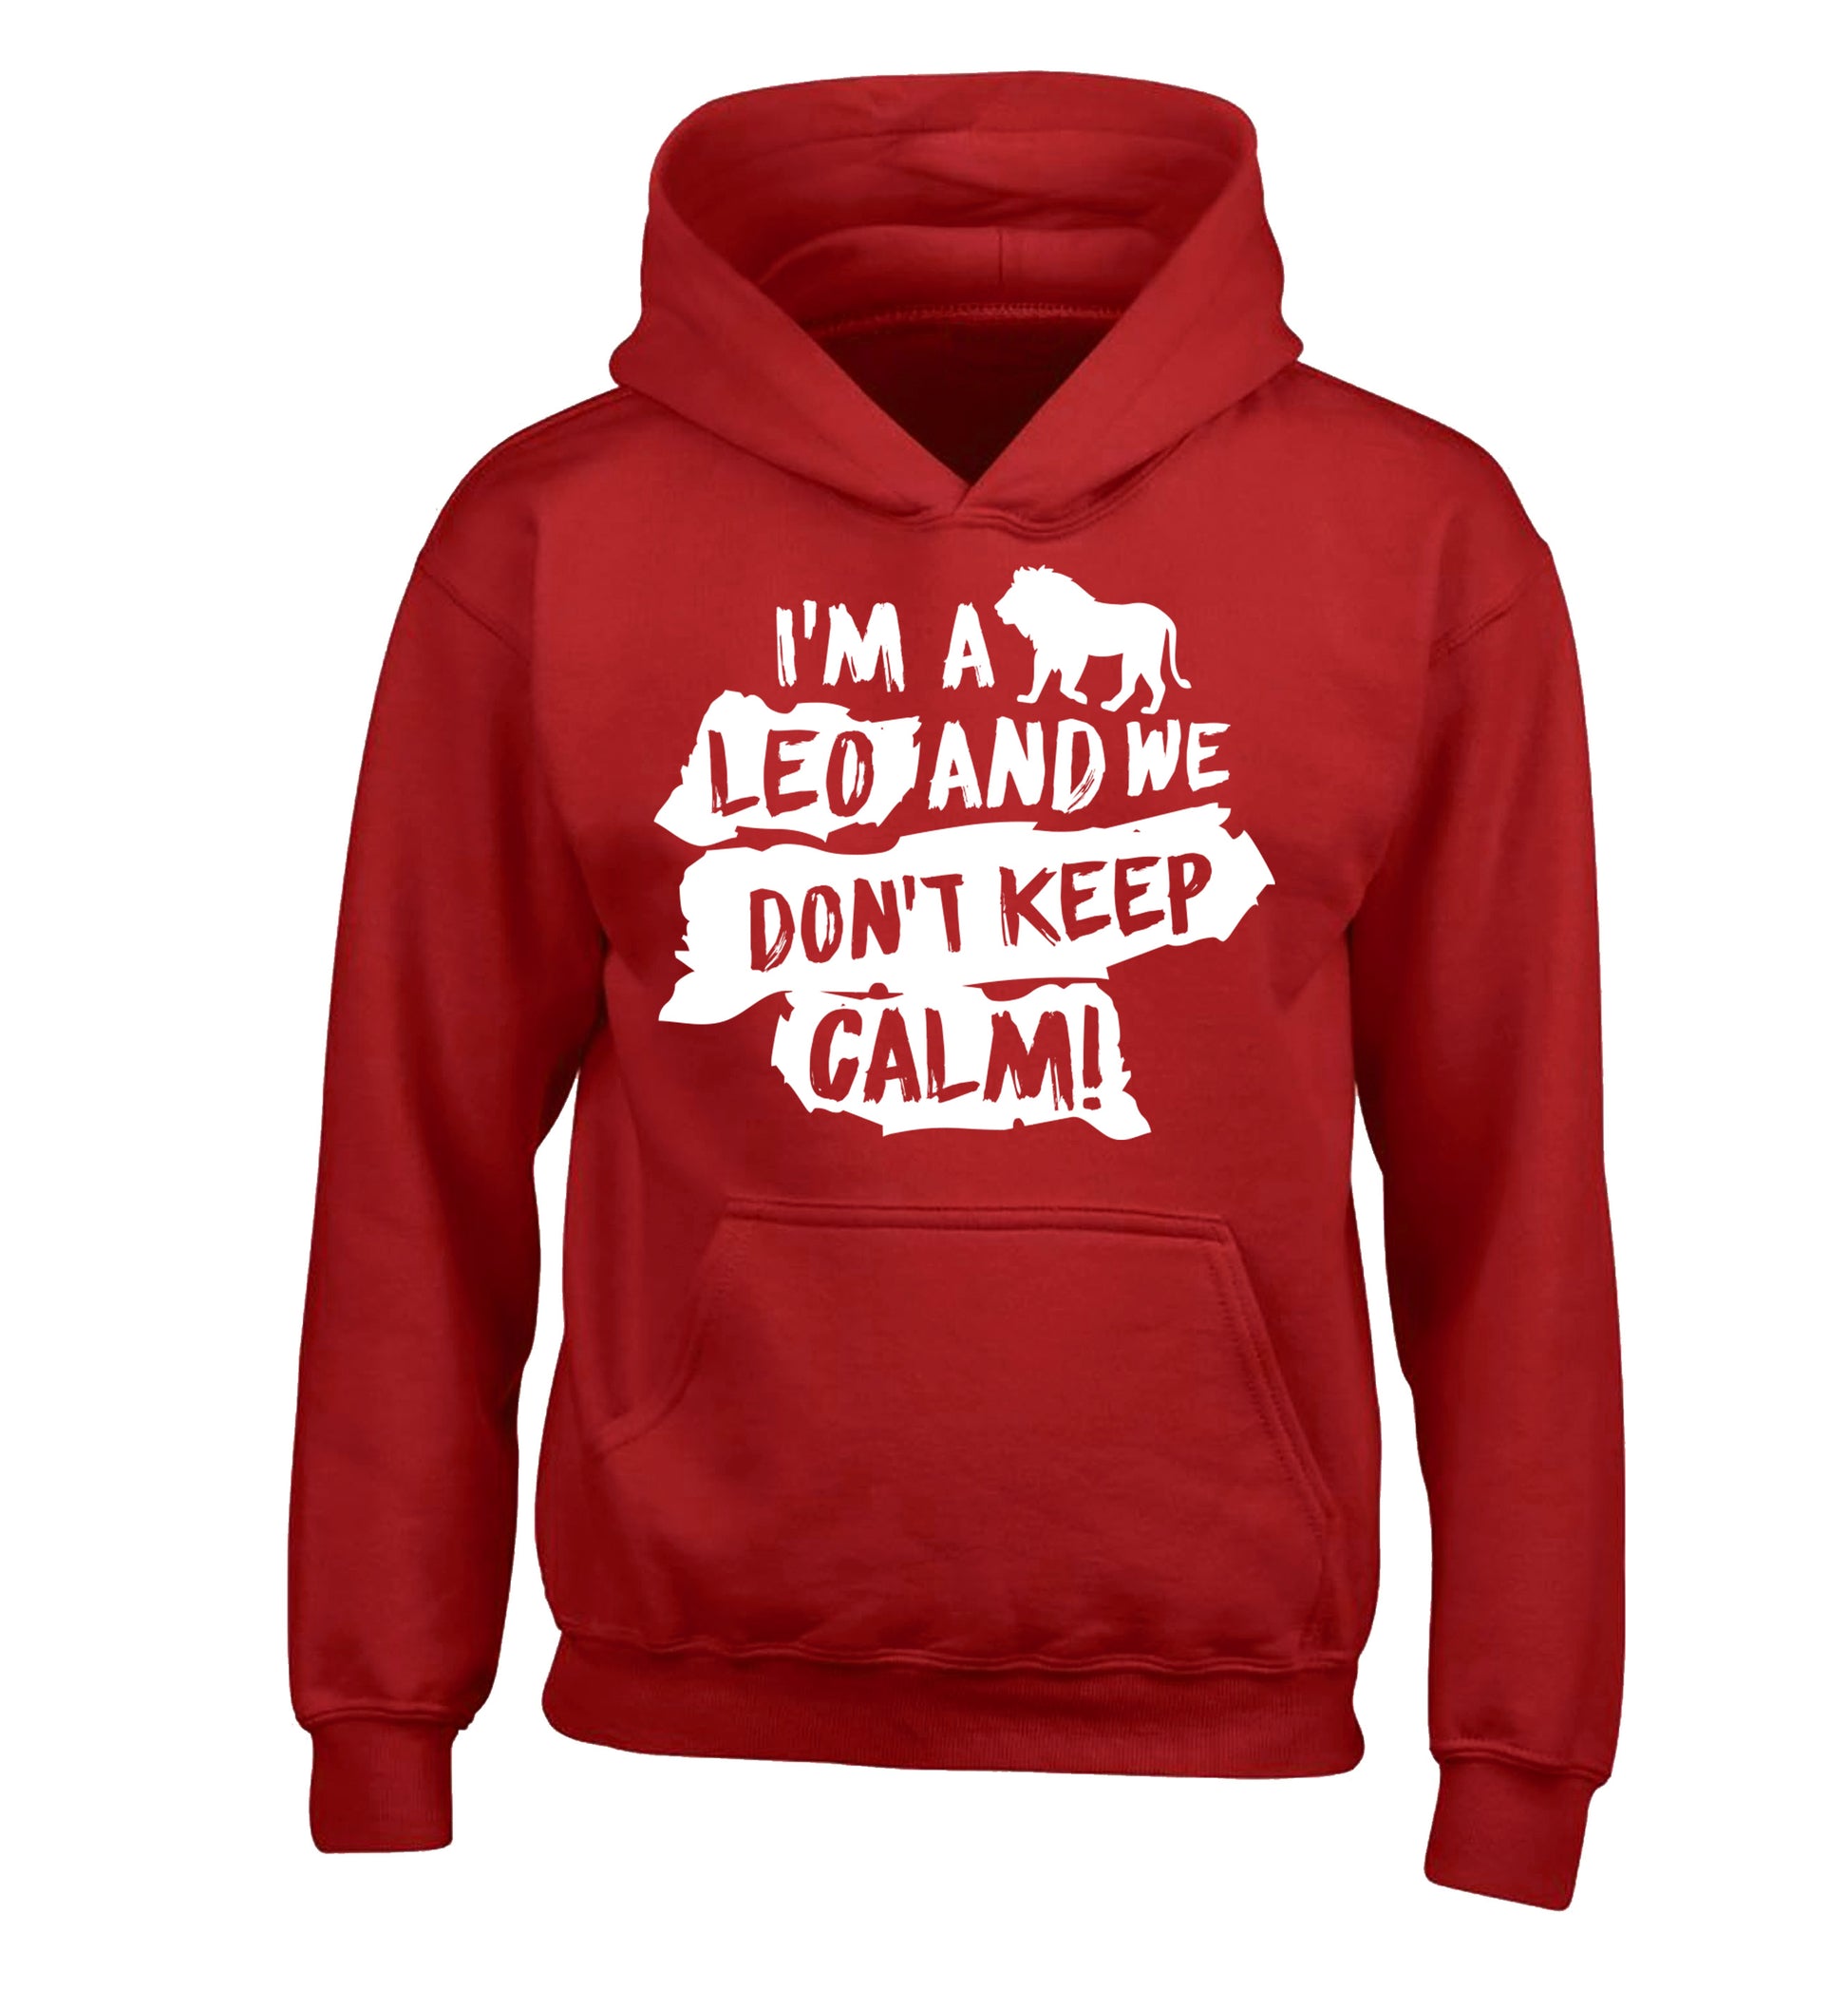 I'm a leo and we don't keep calm! children's red hoodie 12-13 Years